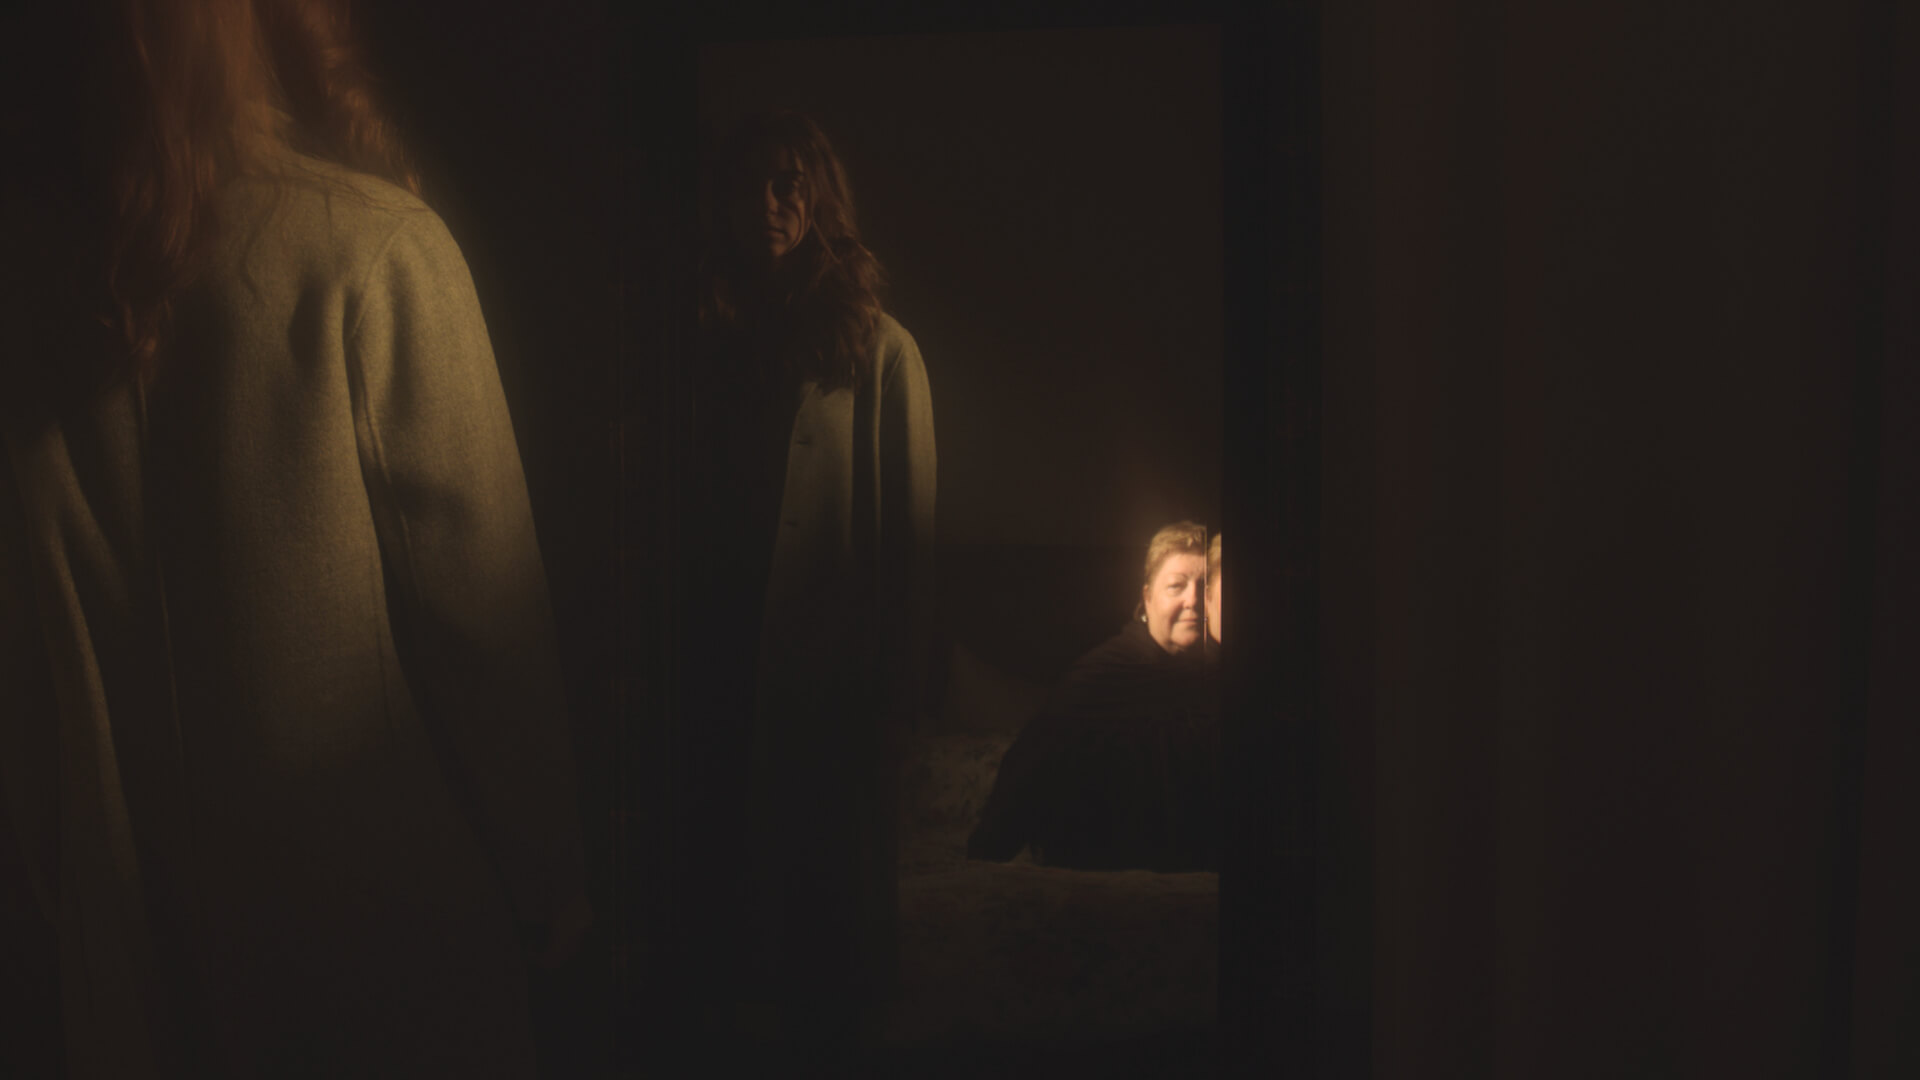 Movie still of a woman looking at her reflection in a dark room. She is wearing a white robe.